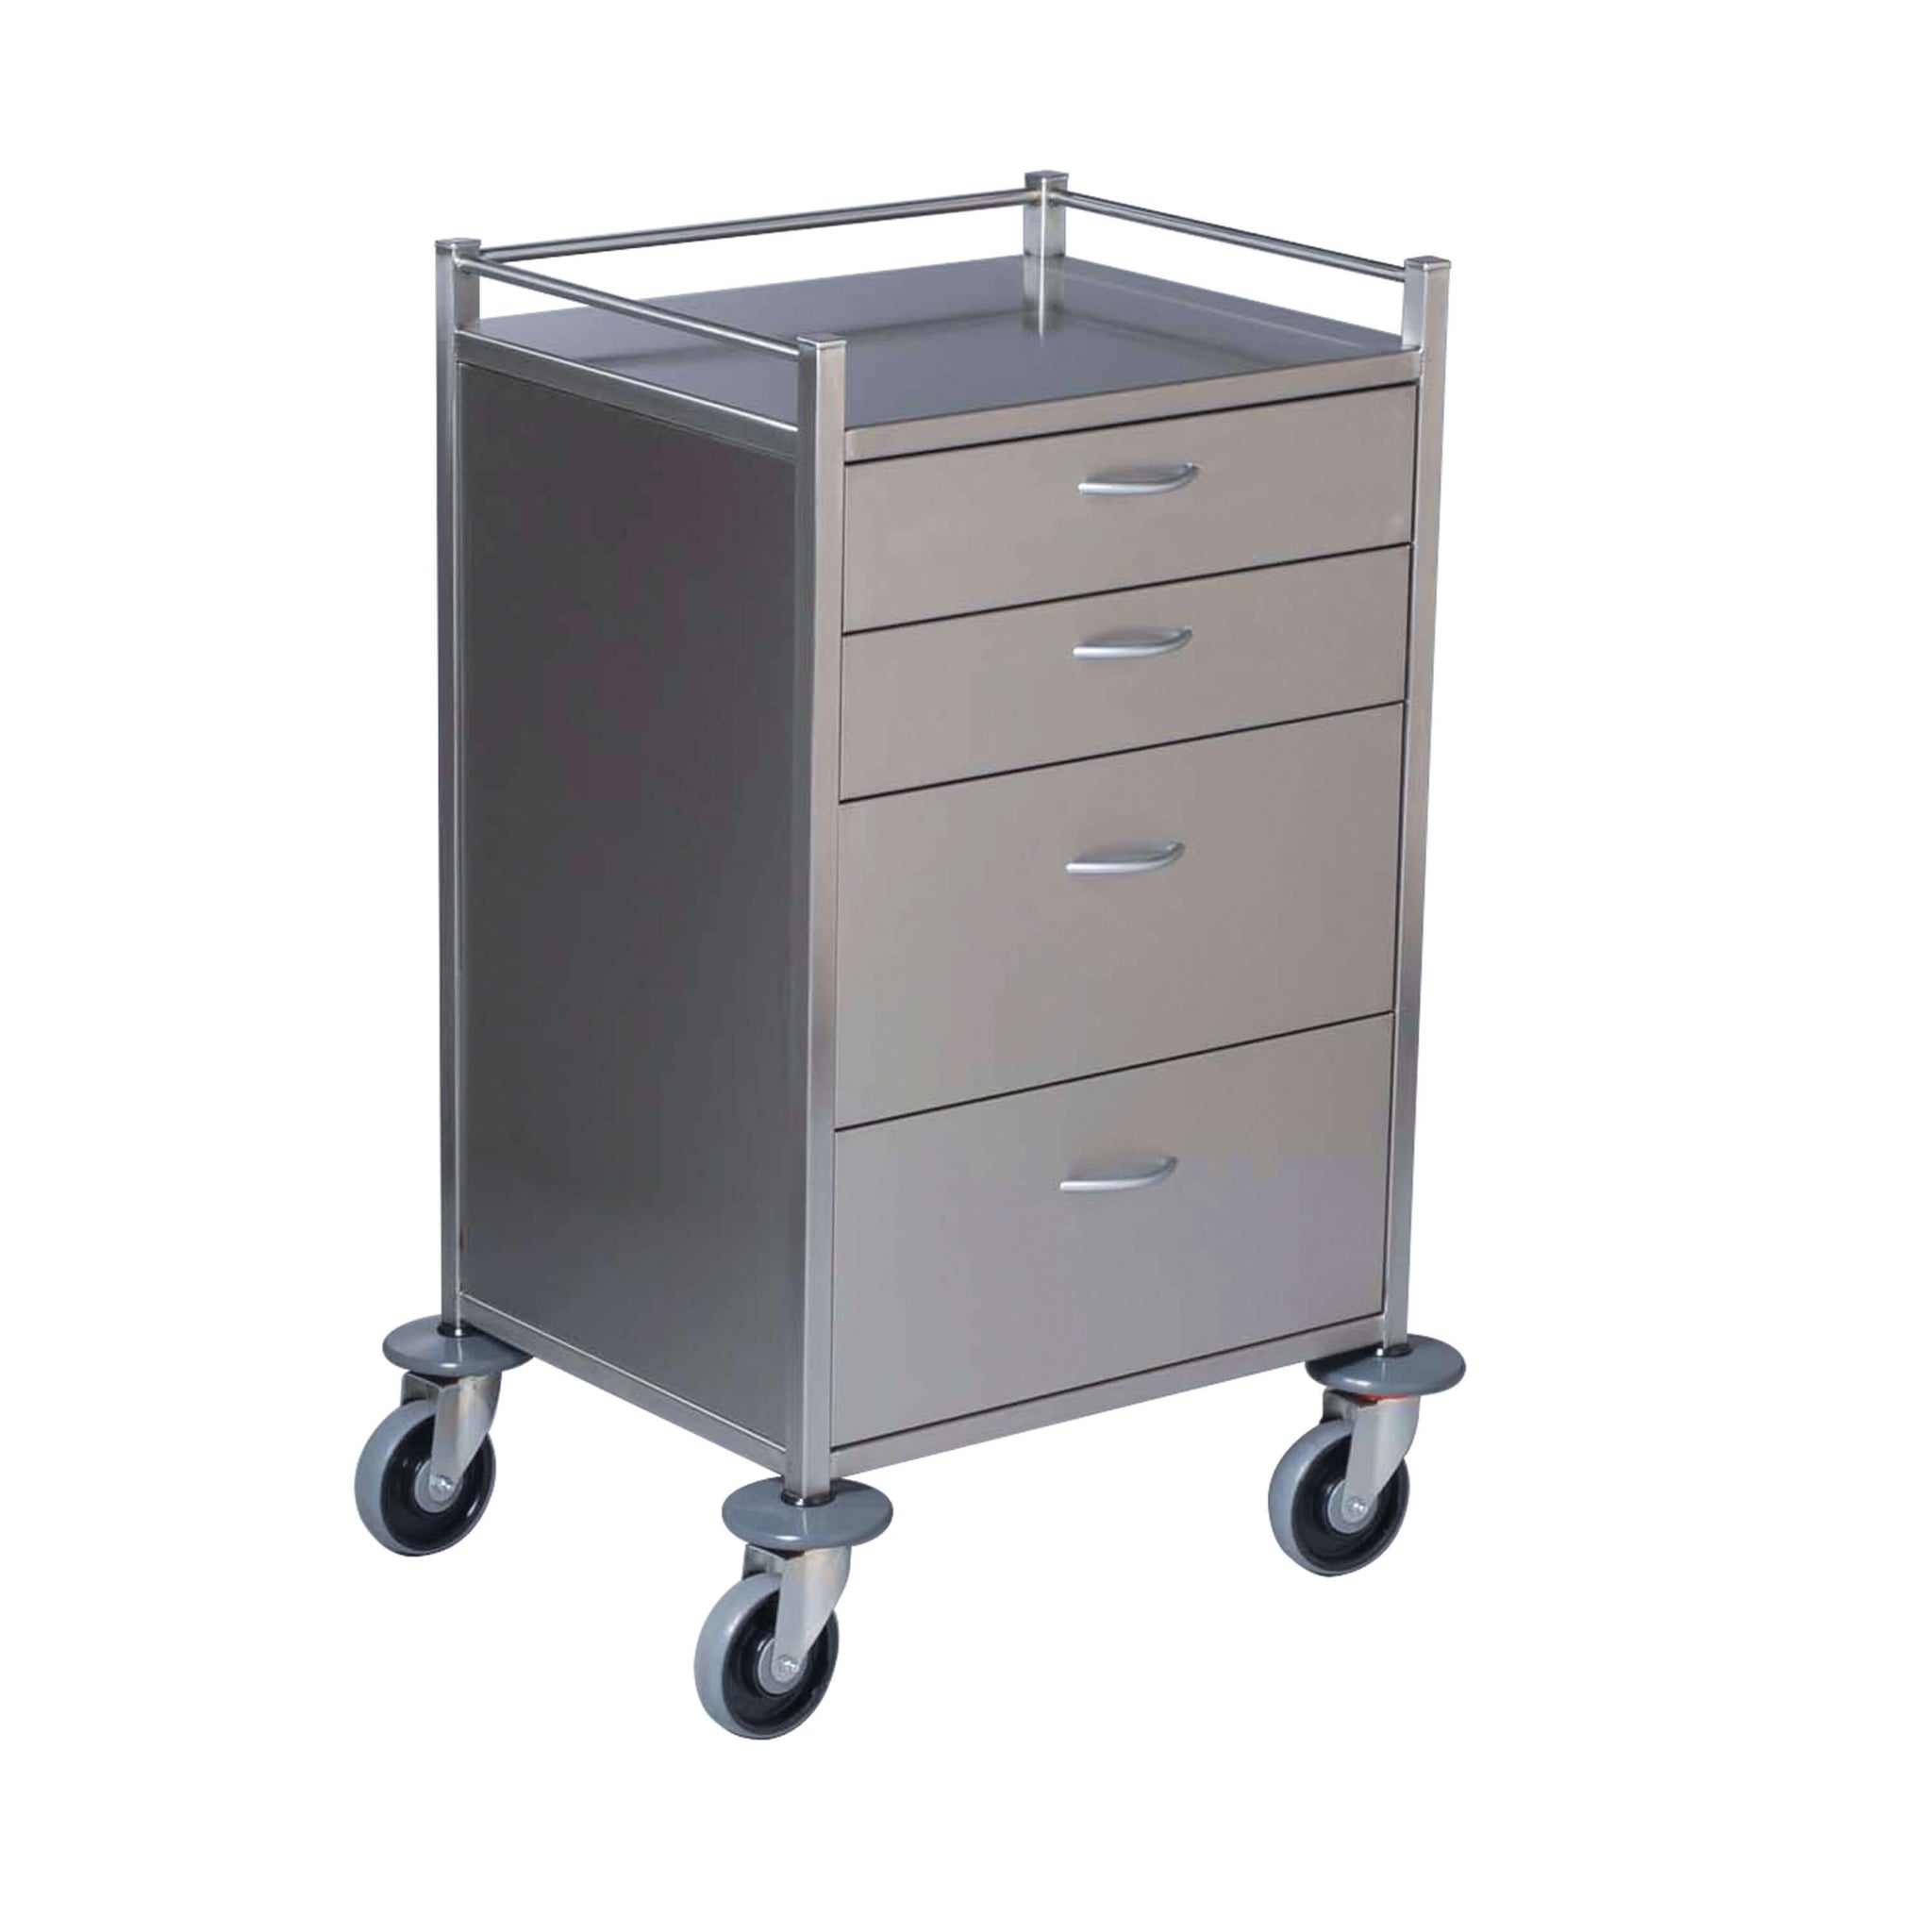 Anaesthetic Trolley- 4 Drawer, 600 X 490 X 1000 mm